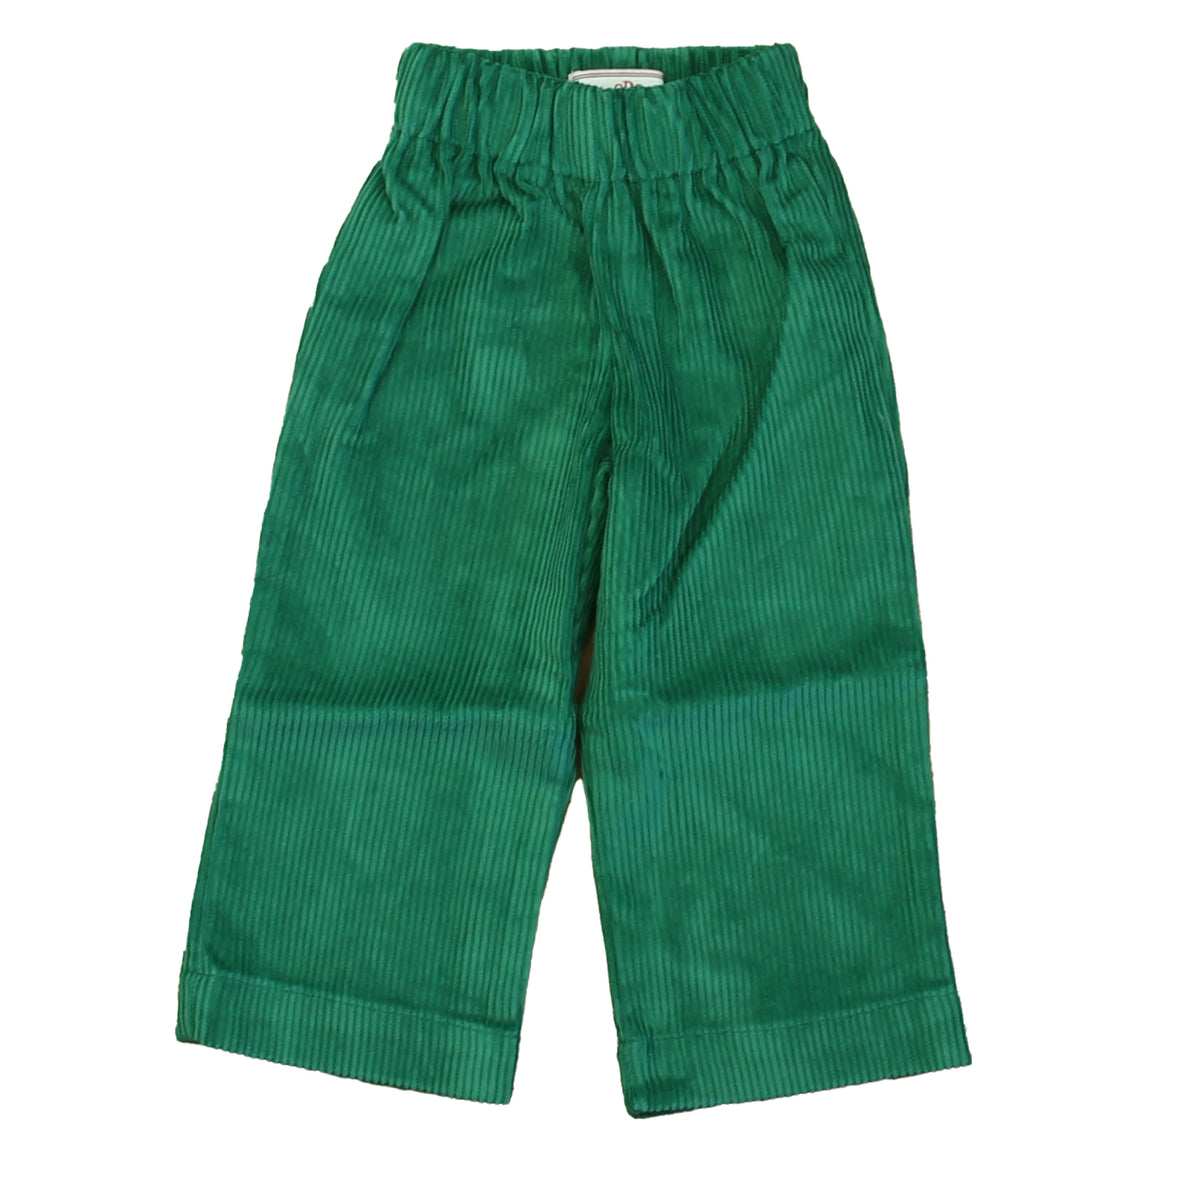 New with Tags: Cadium Green Pants size: 9-12 Months -- FINAL SALE